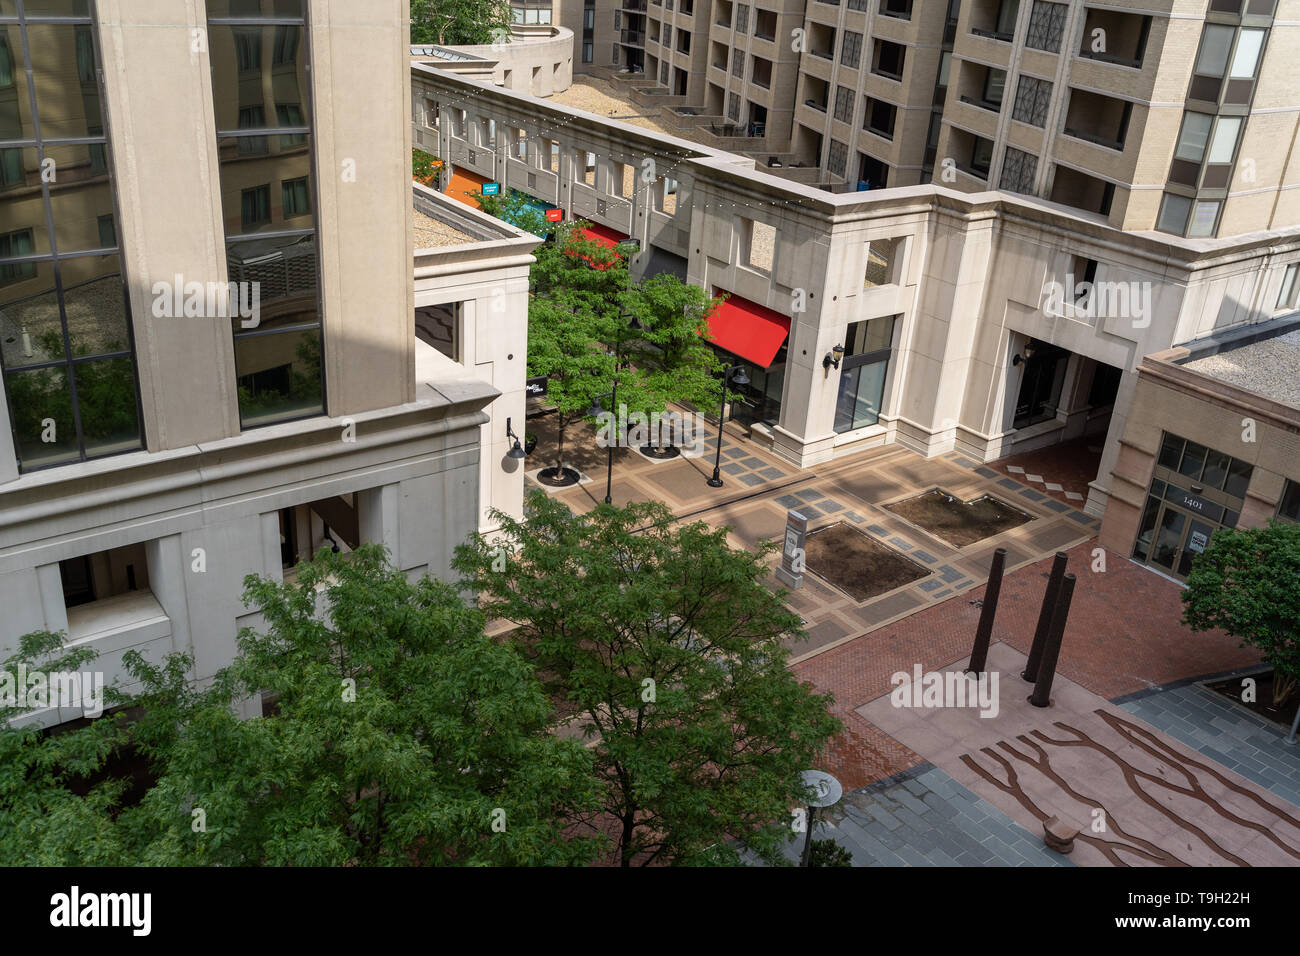 Arlington, Virginia - May 9, 2019: Aerial view of the Courthouse Plaza area in the urban Court House neighborhood in Northern Virginia Stock Photo